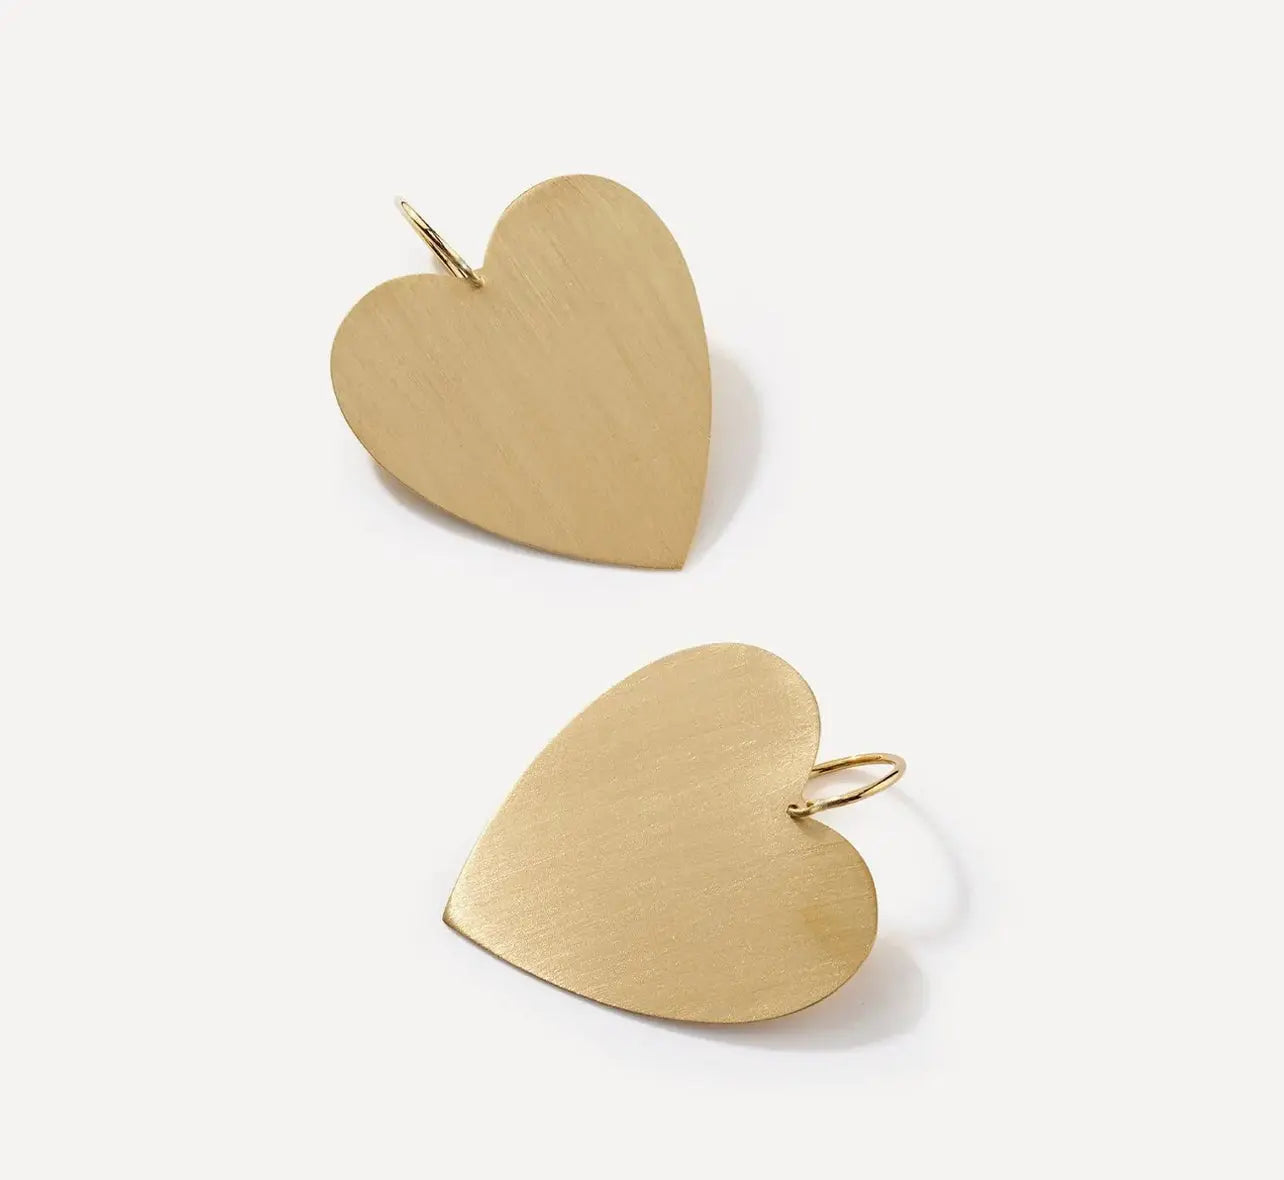 This piece is from the classic collection and is Irene's signature large flat heart-shaped drop earrings in 18k yellow gold with a satin finish.  Designed by Irene Neuwirth and made in LA